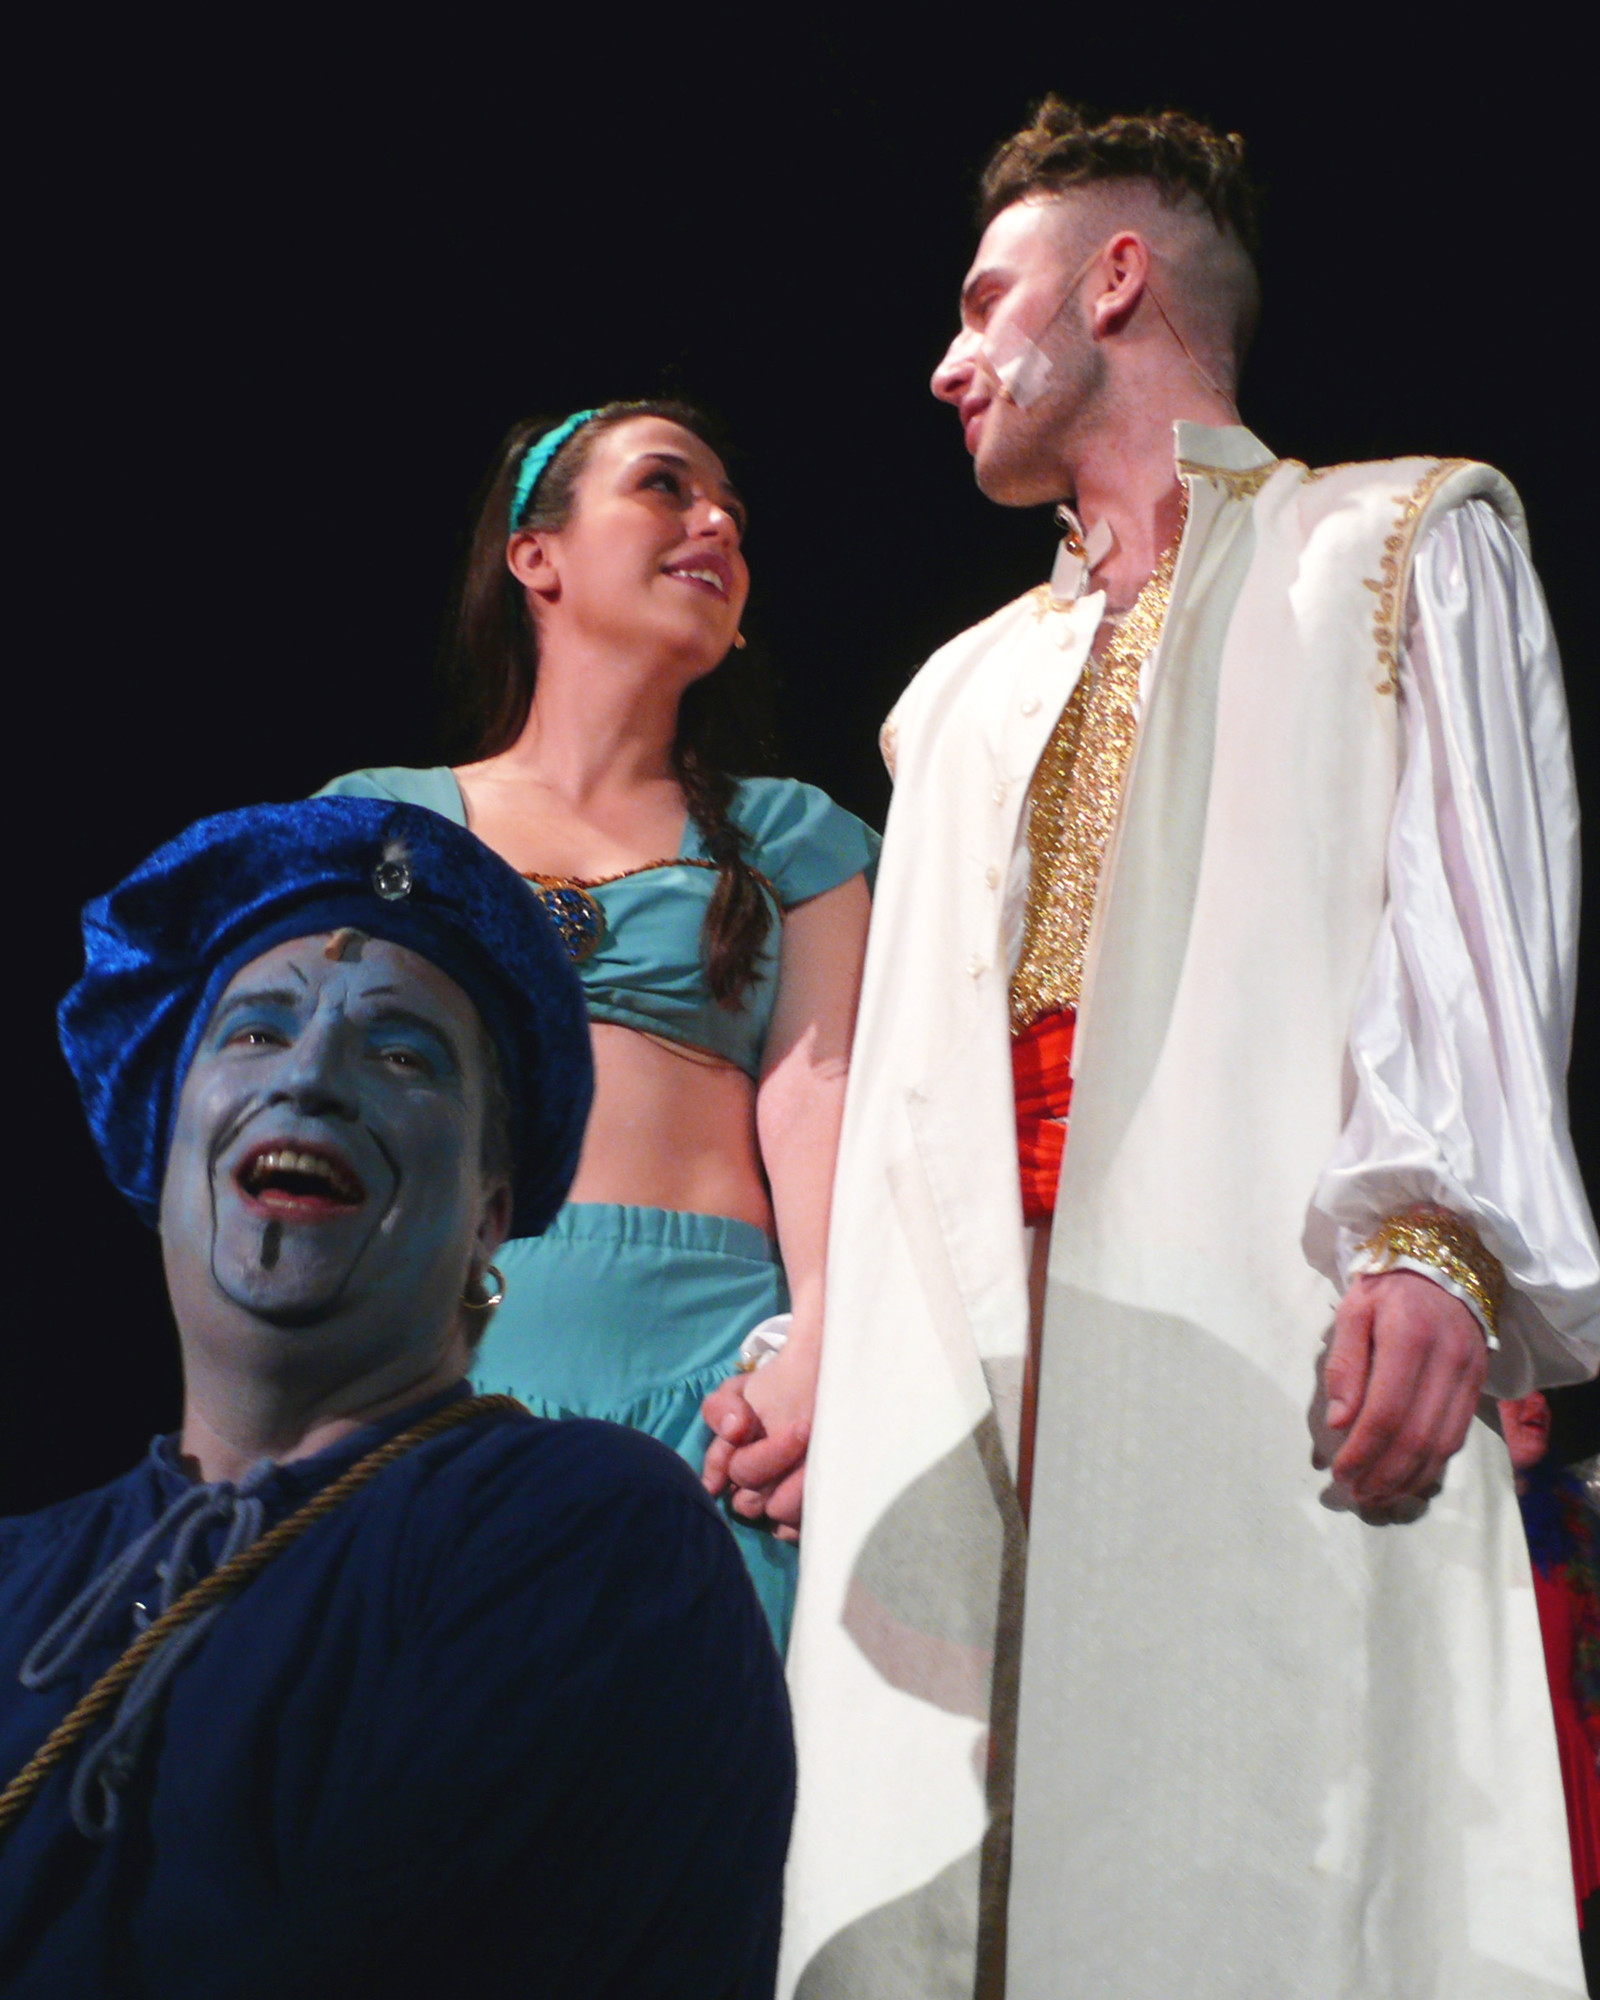 Plaza Theatrical Productions in Bellmore staged Disney’s “Aladdin Jr.” on Feb. 6. The genie was played by T.C. Weiss, Jasmine by Rachael Connolly and Aladdin played by Niko Touros. The Finale featured a happy, upbeat sing-along.